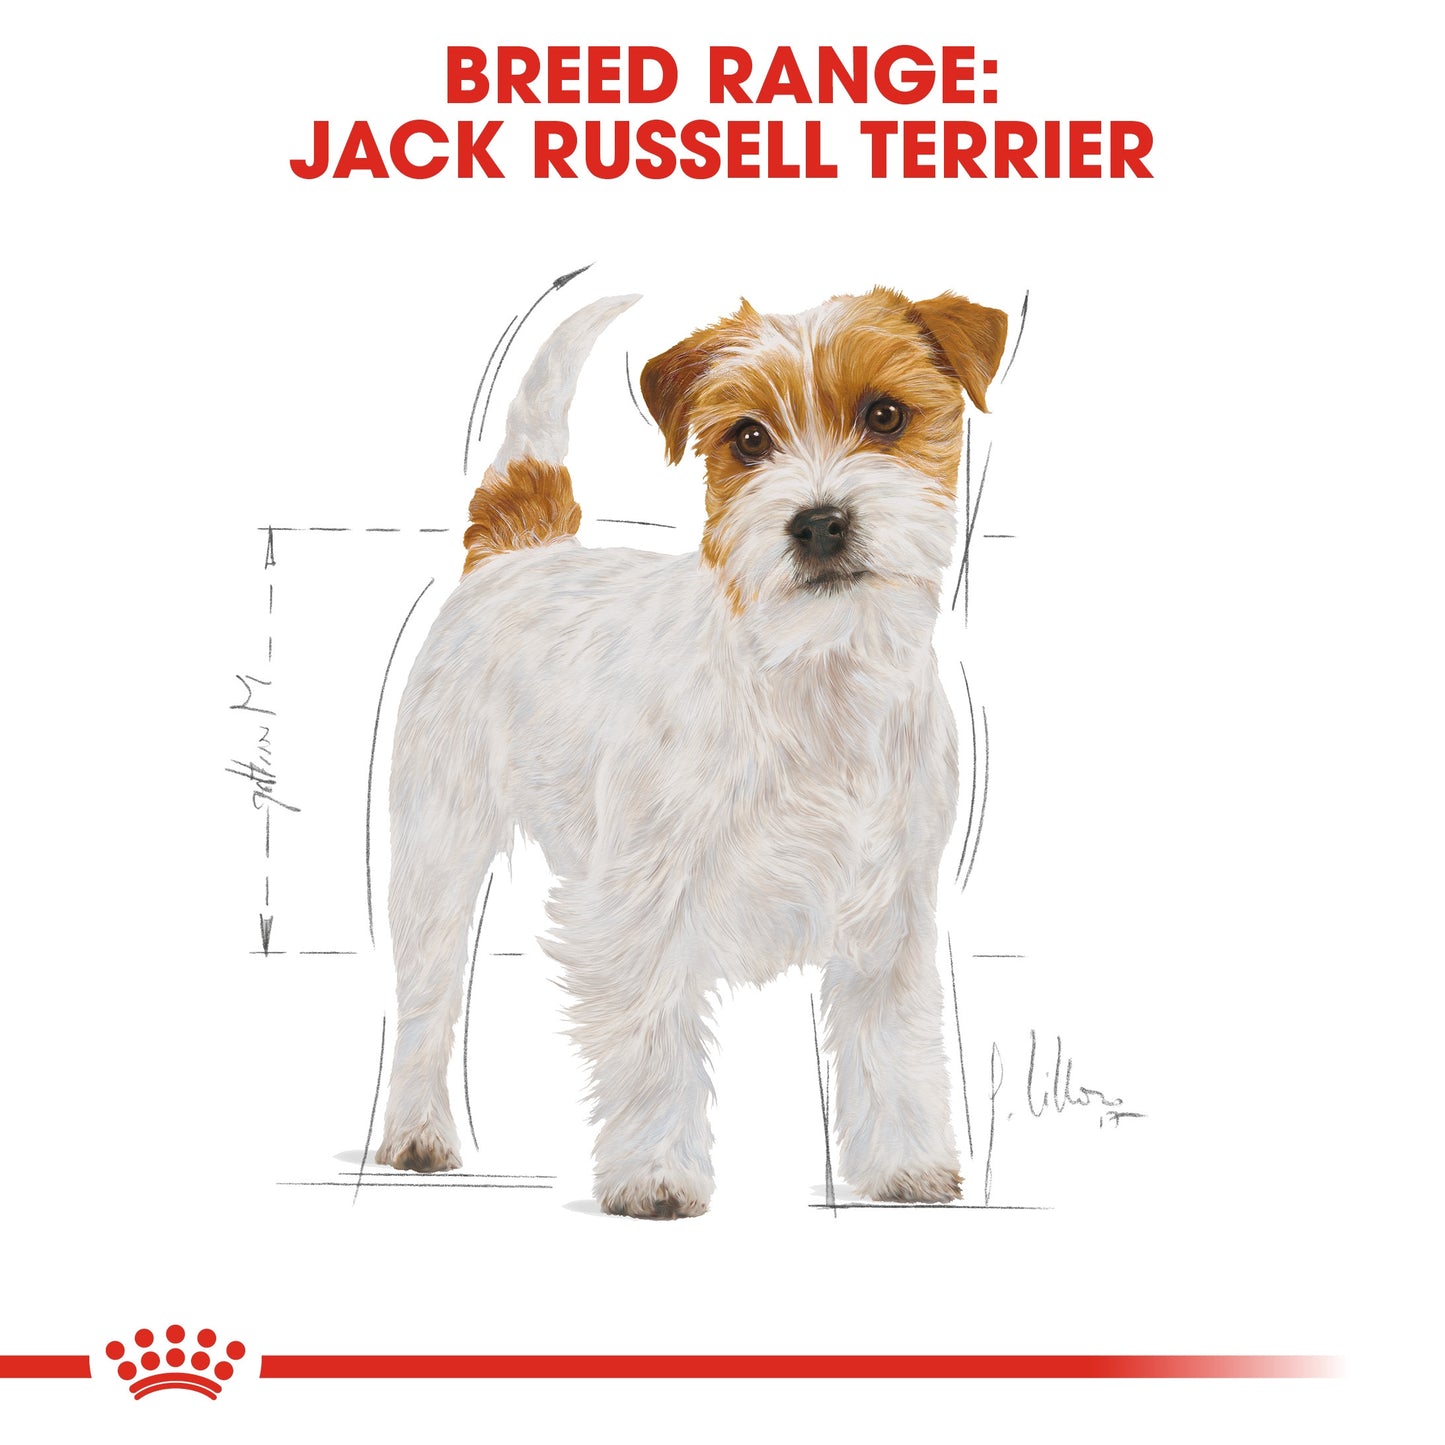 ROYAL CANIN  JACK RUSSELL ADULT 1.5 KG